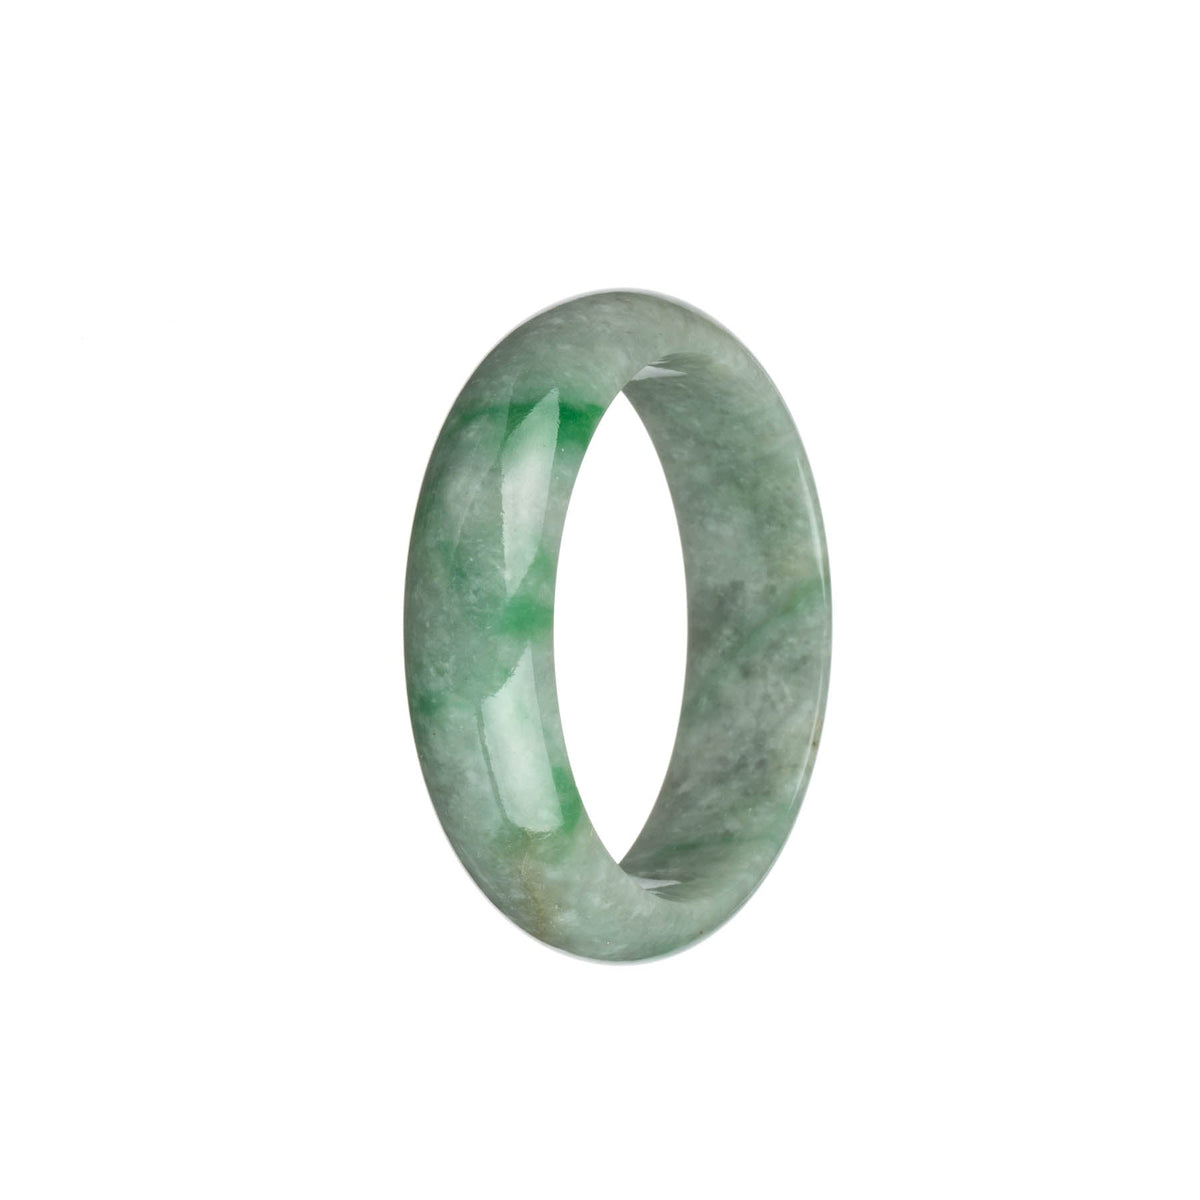 Genuine Natural Light Grey with Emerald Green Patterns and Light Brown Patches Burmese Jade Bangle Bracelet - 51mm Half Moon